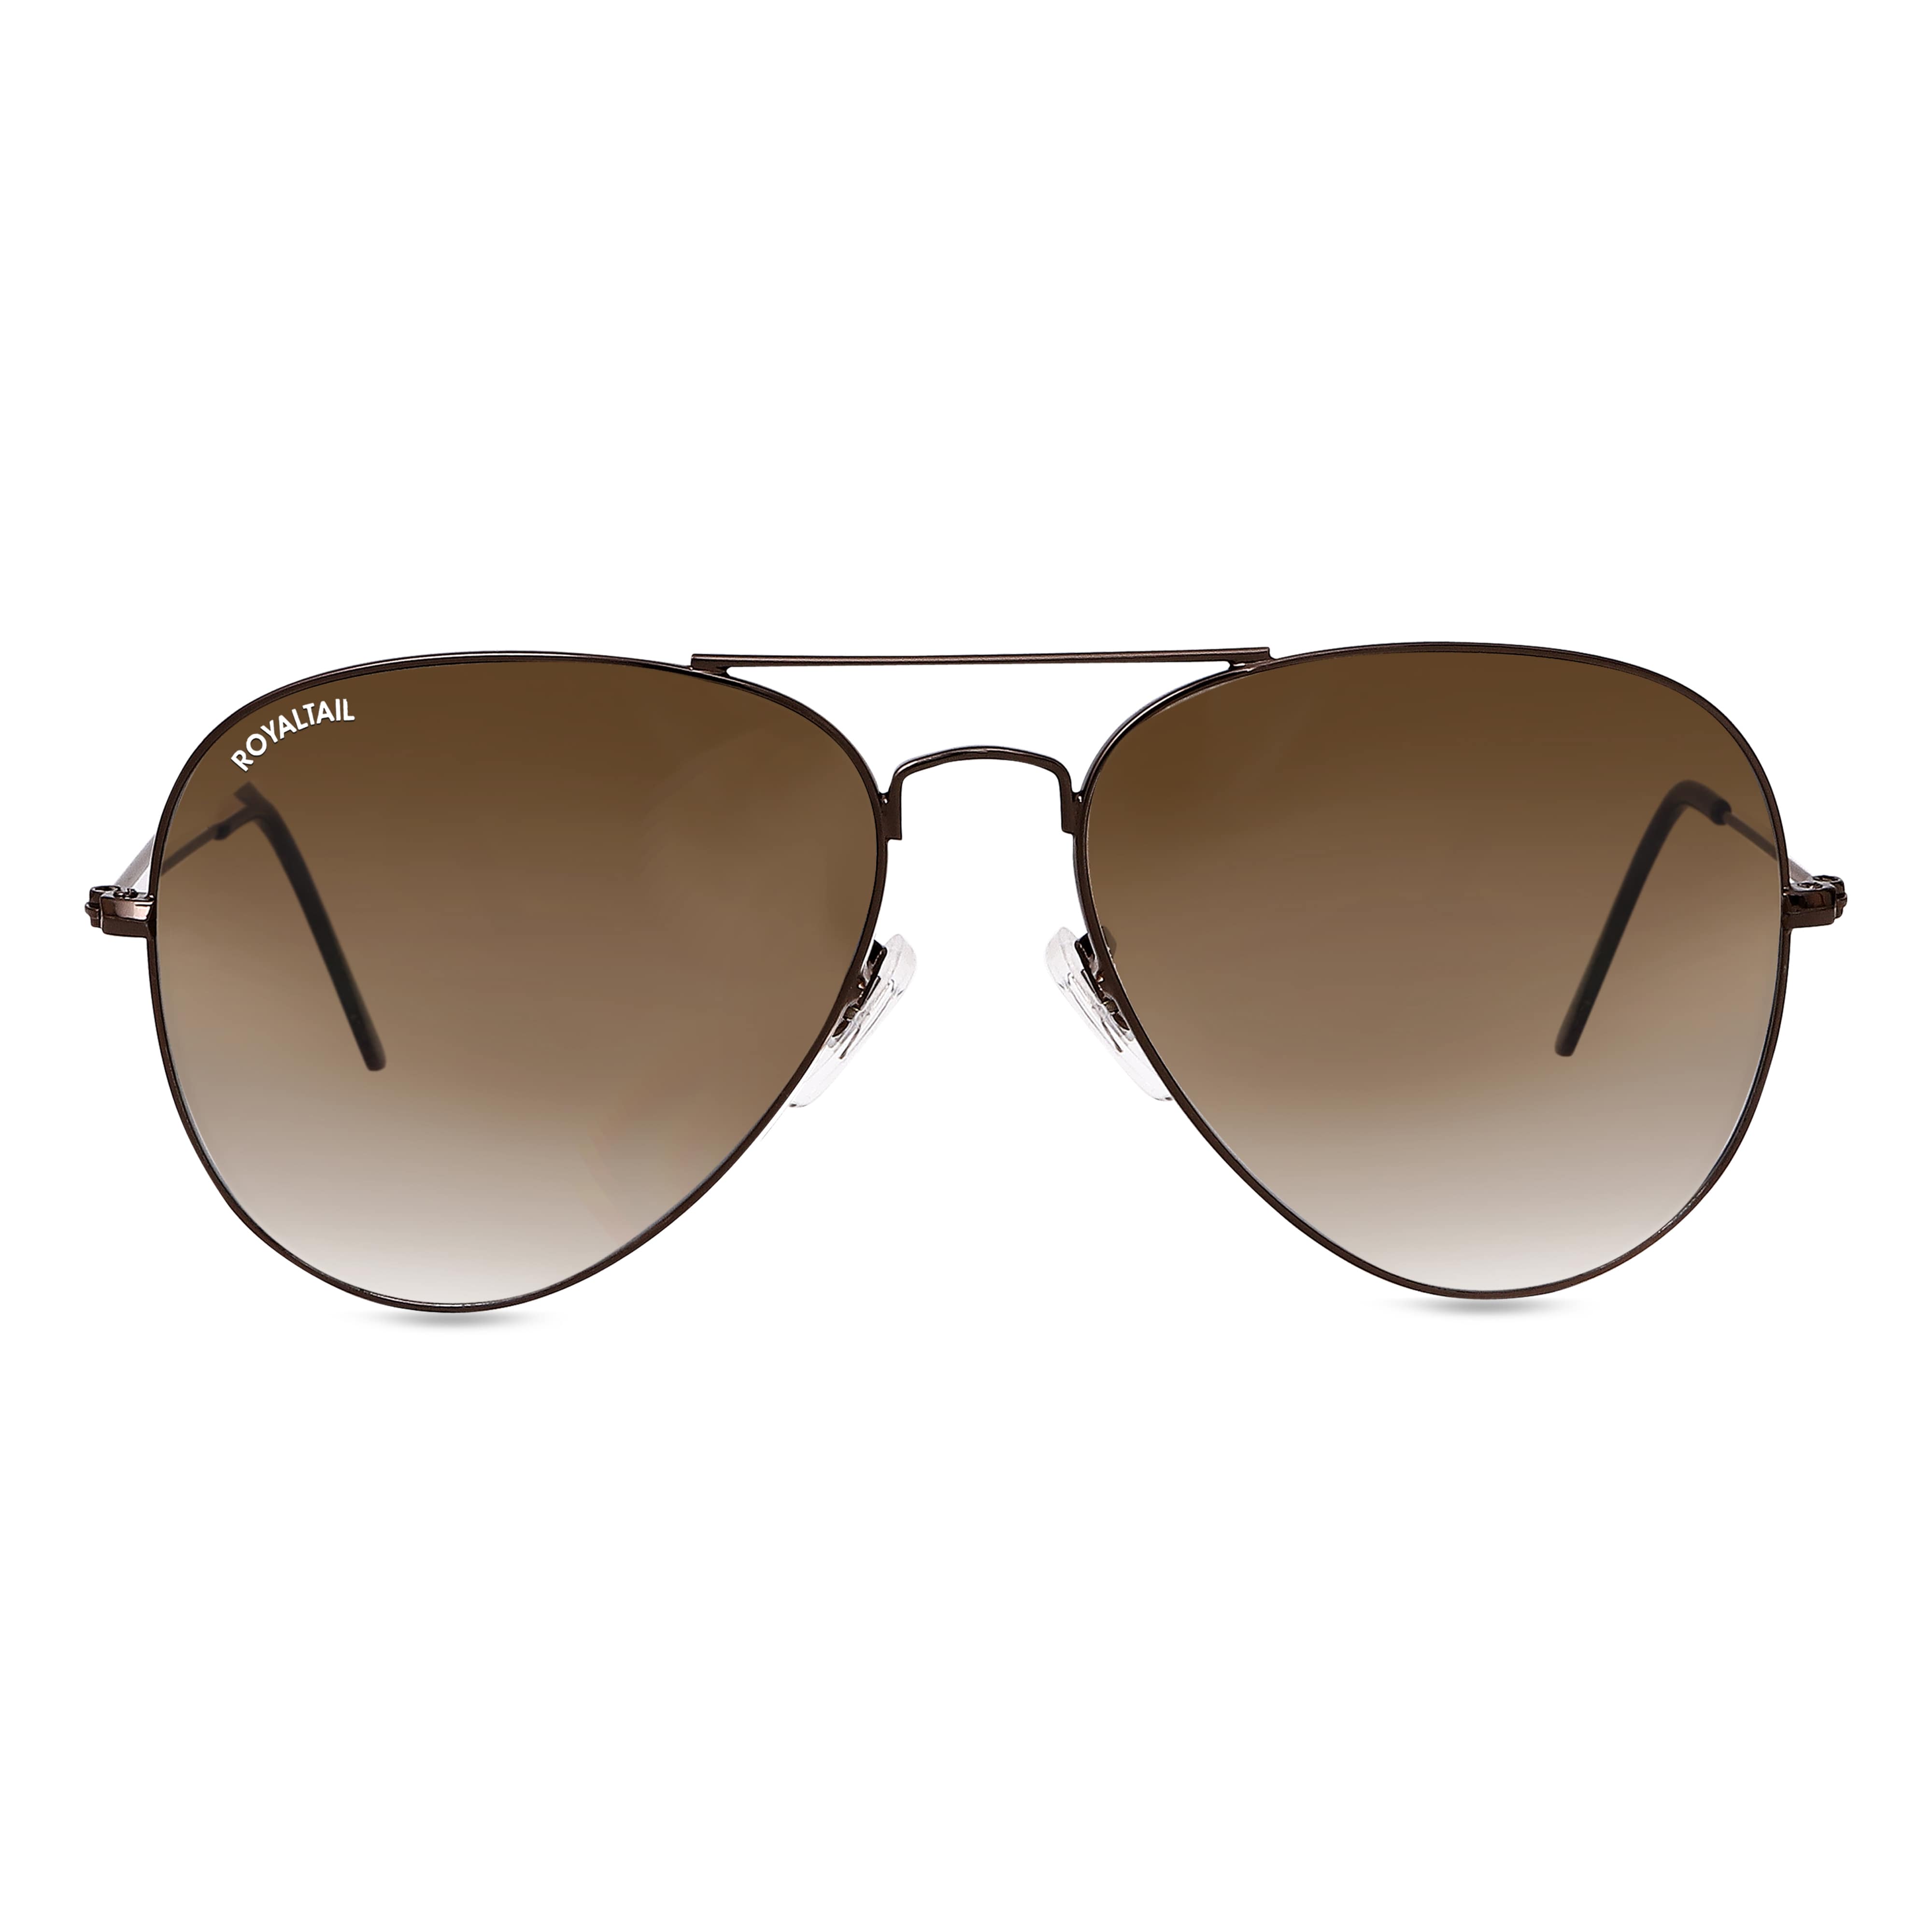 Gtand $15 Aviator Sunnies Are a 'Wow' Pair That Look Ultra-Luxe | Us Weekly